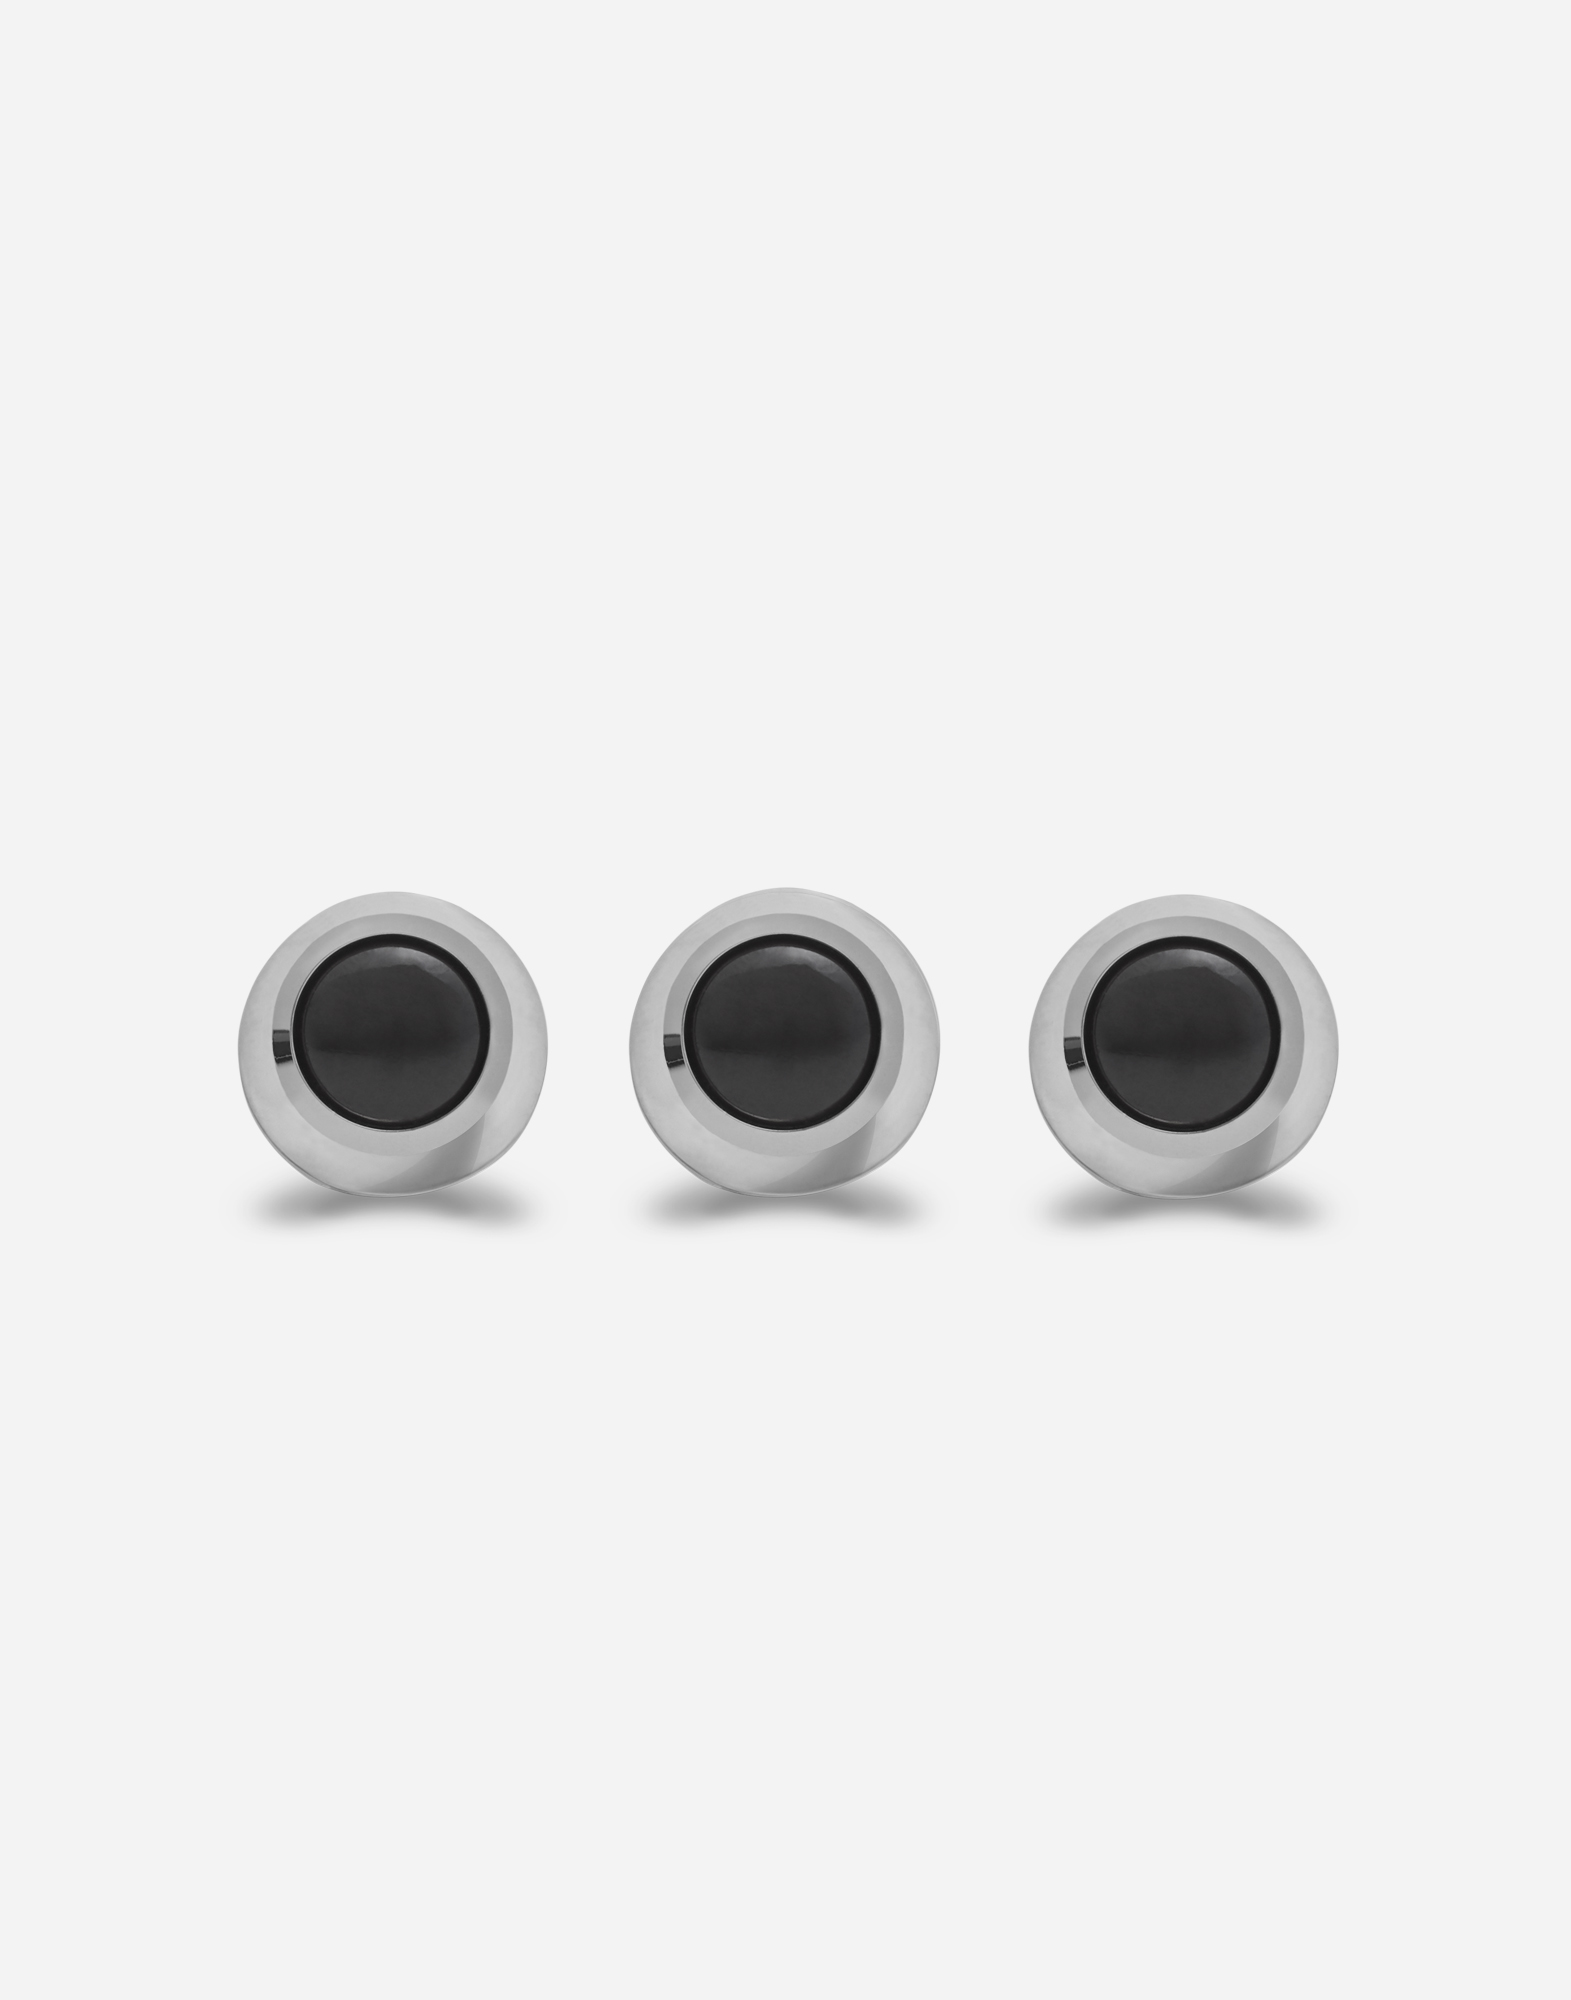 White gold tuxedo buttons with black jades in White Gold